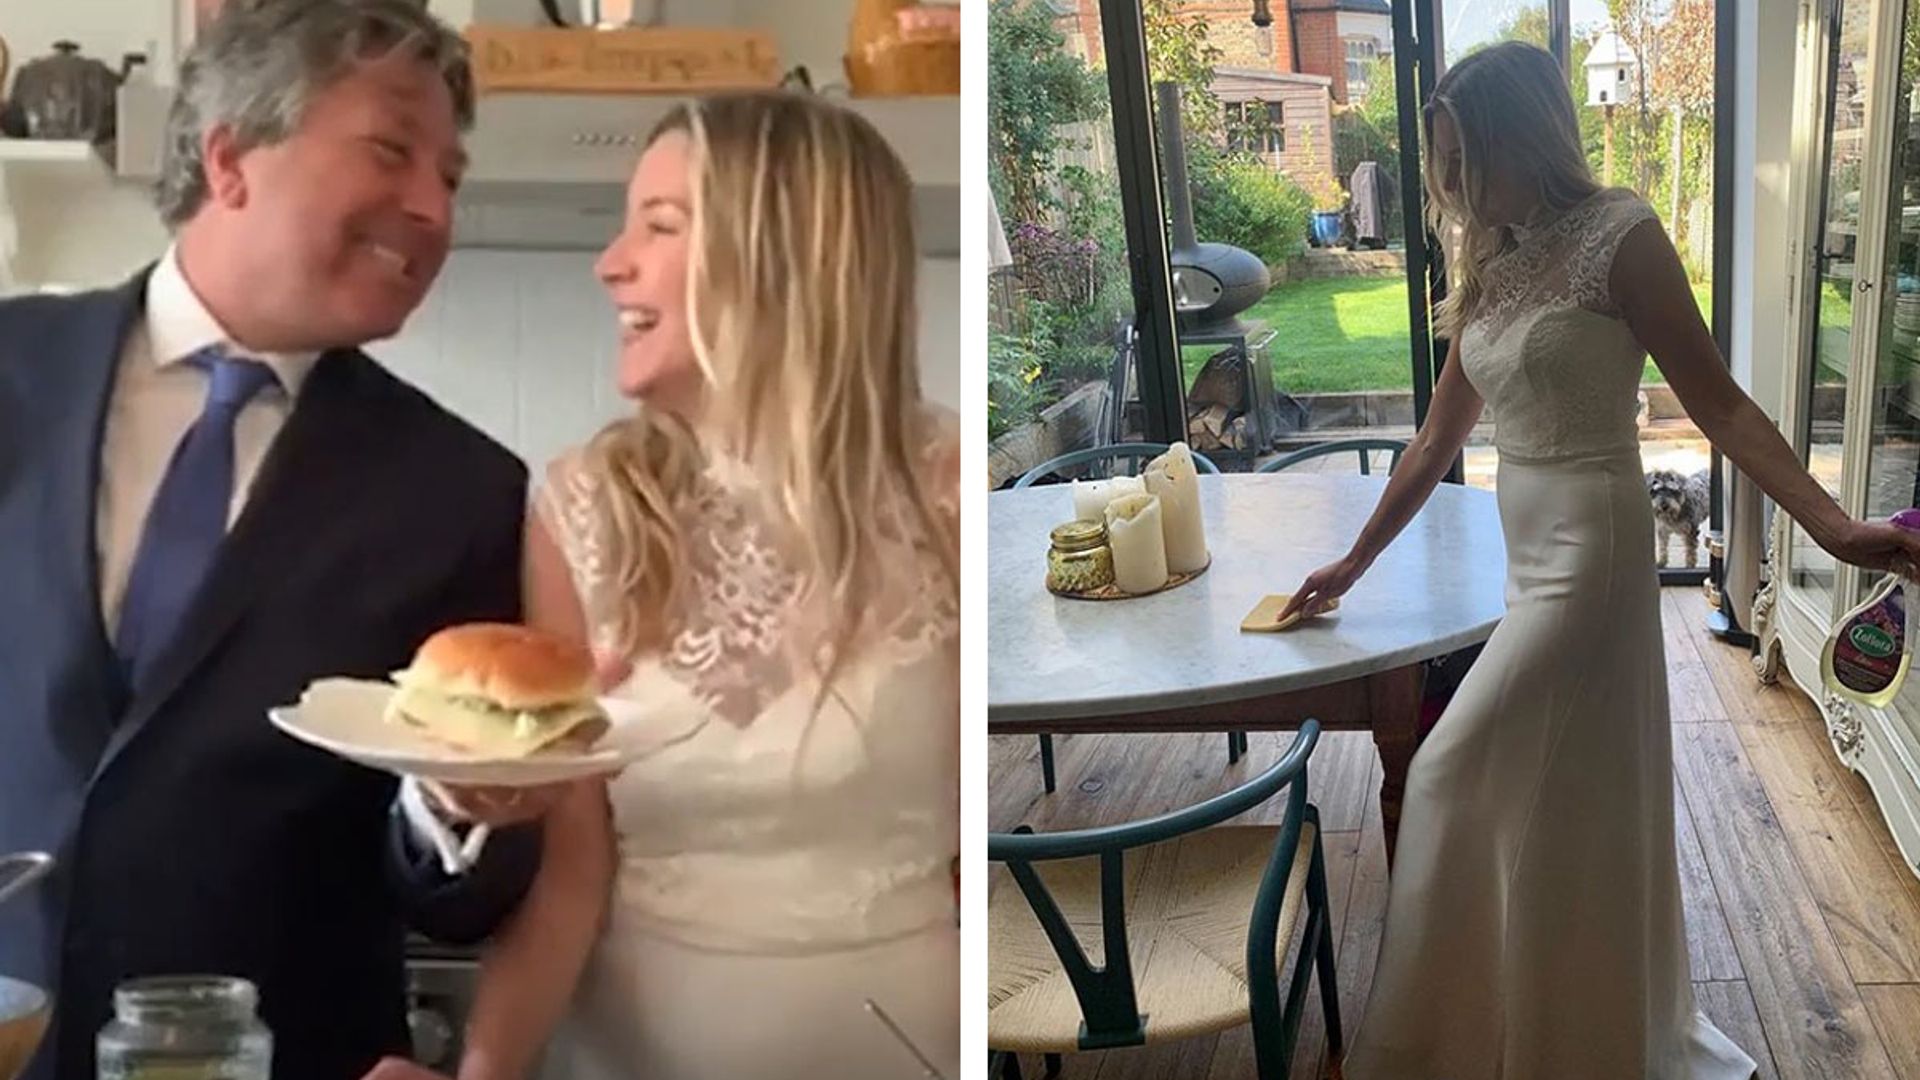 John Torode and Lisa Faulkner stun fans as they cook burgers and do housework in their wedding outfits